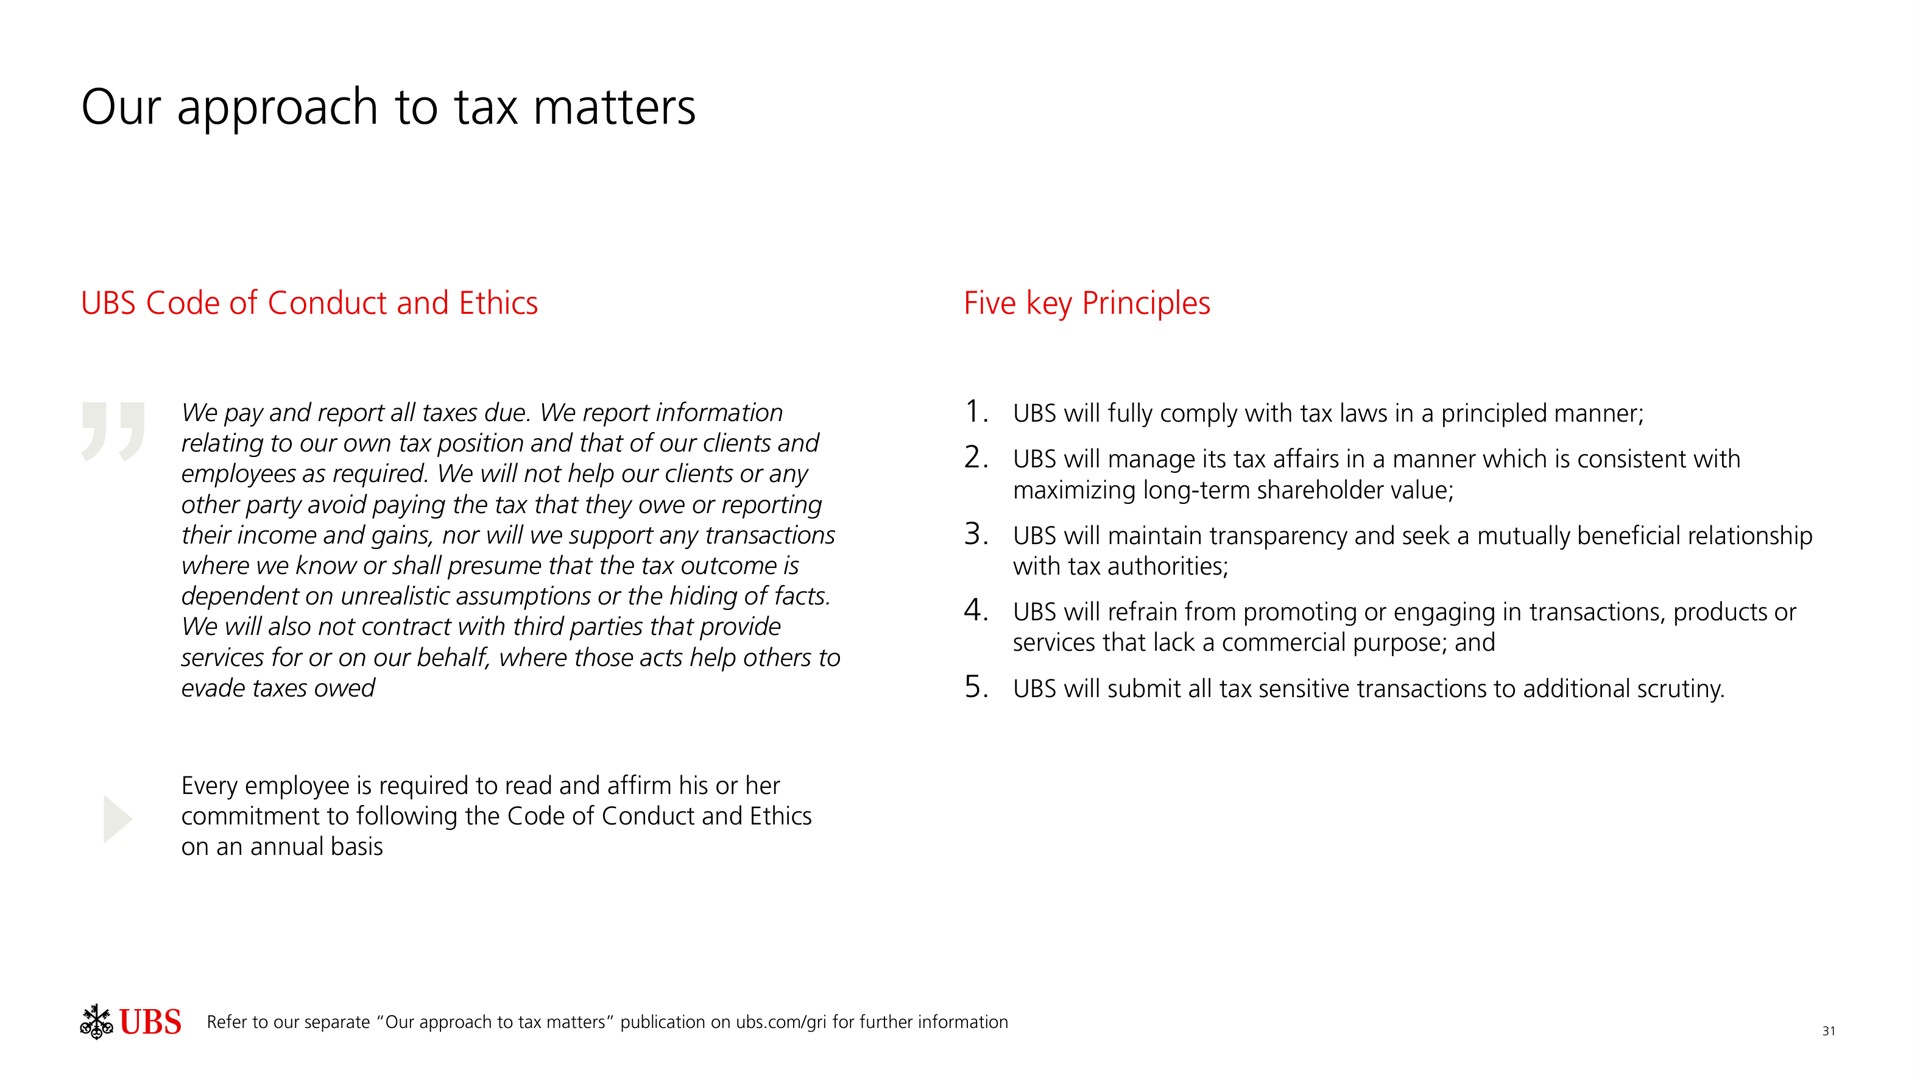 our approach to tax matters code of conduct and ethics five key principles | UBS